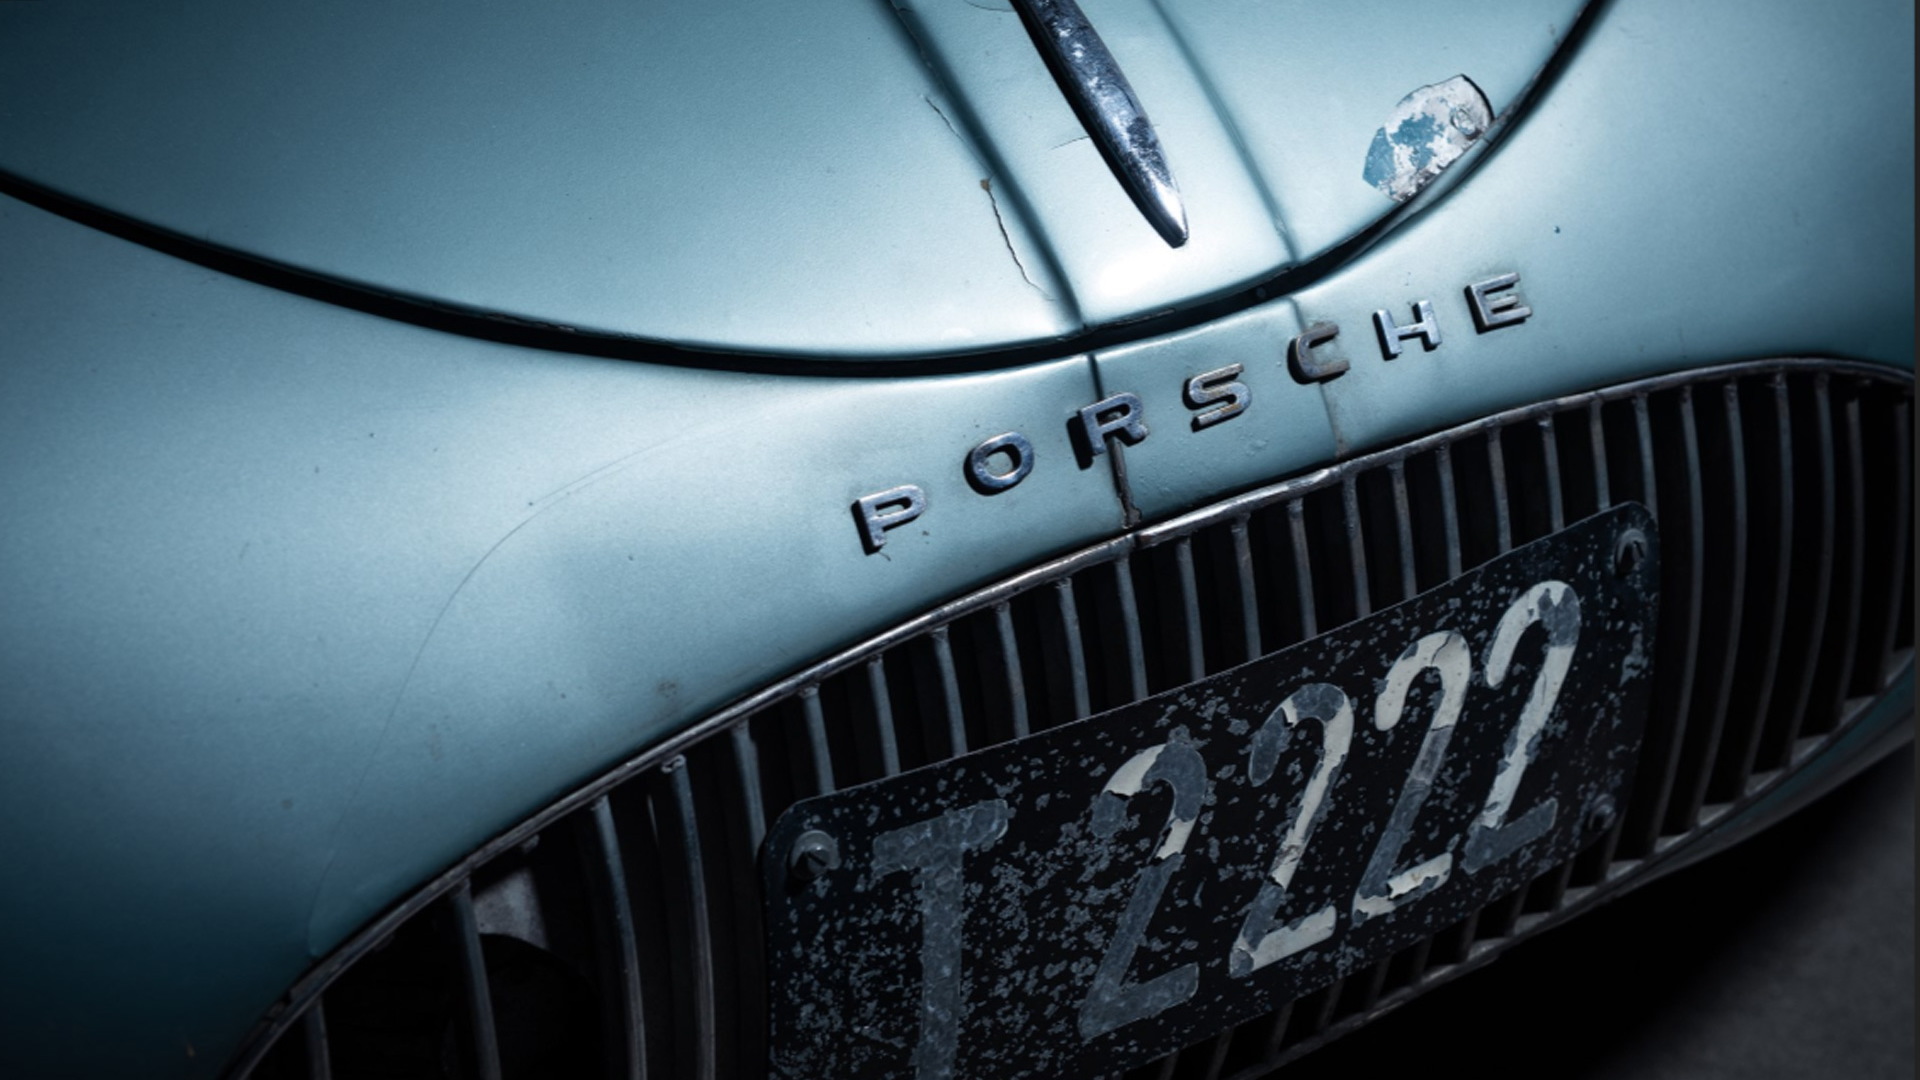 Oldest surviving Porsche prototype, from 1939, set to be auctioned off